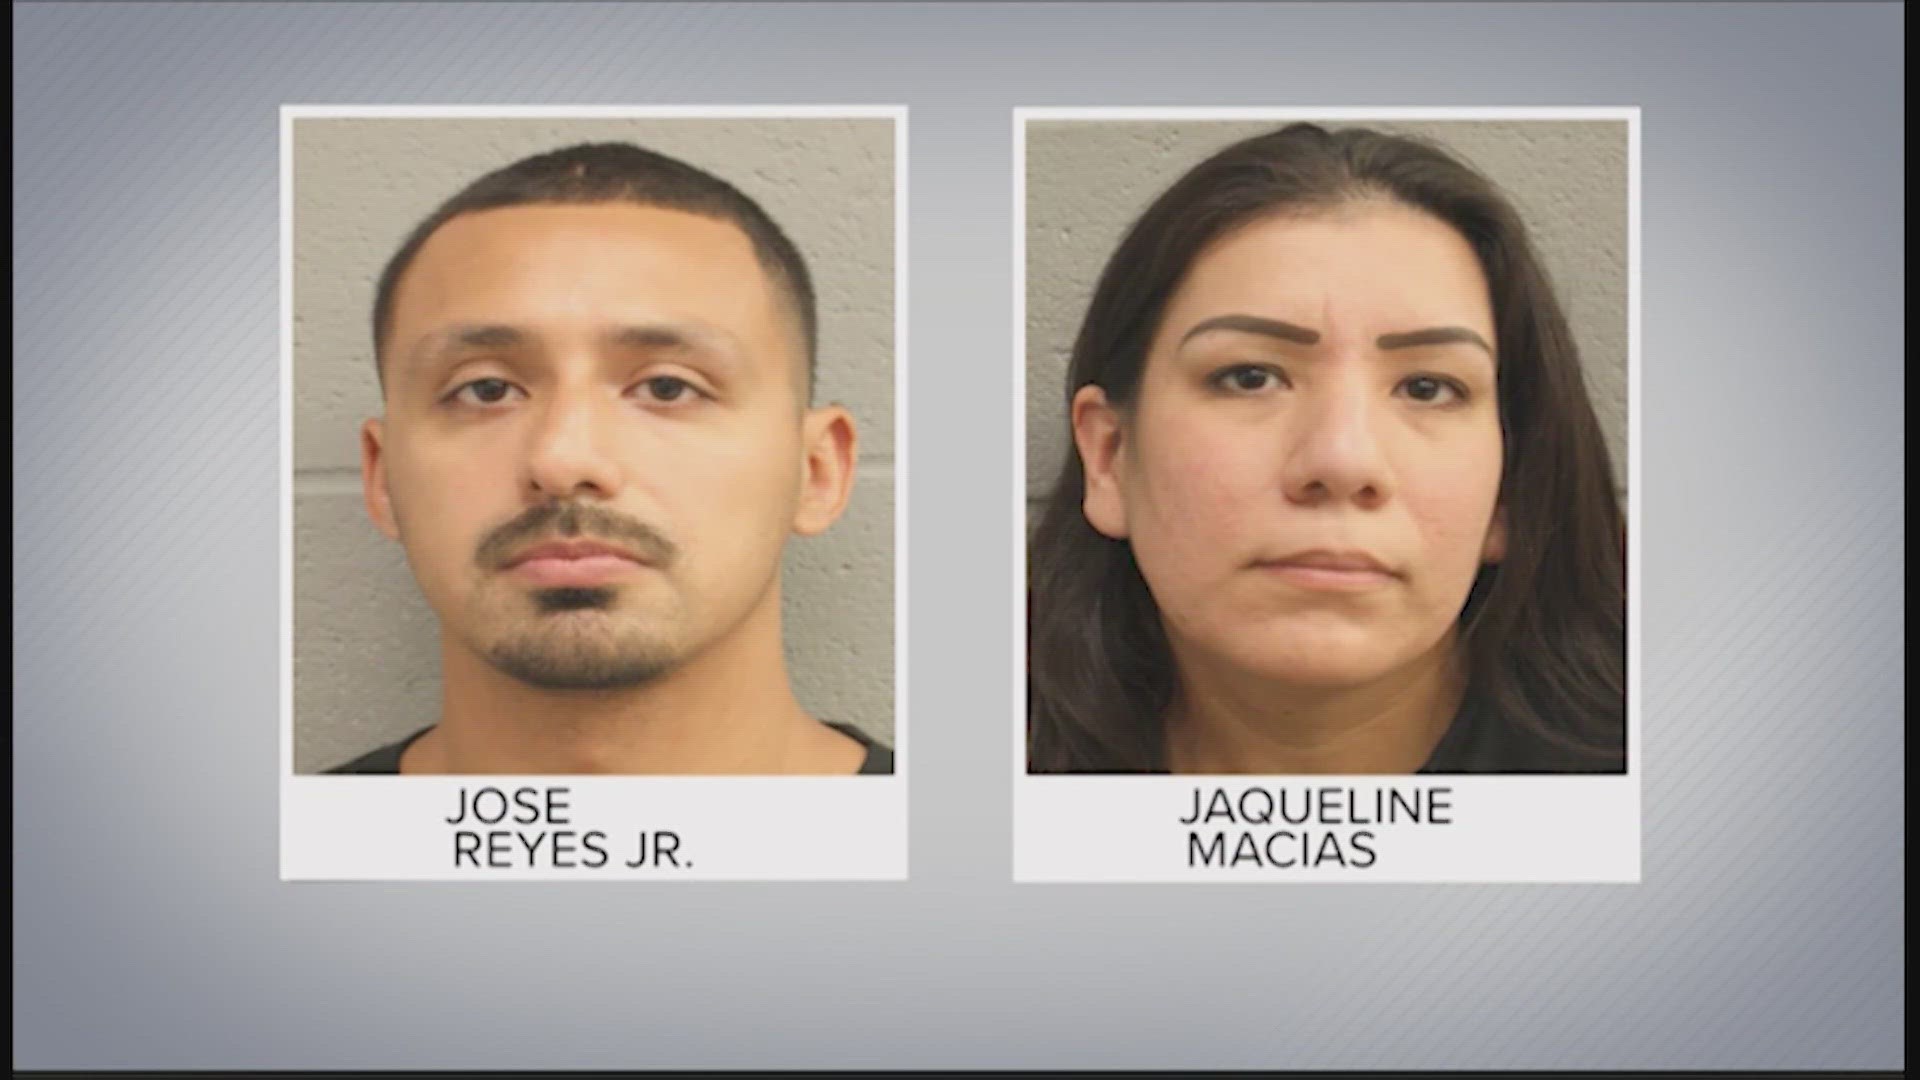 The couple faces aggravated kidnapping charges, but authorities told KHOU 11 that more charges are possible.